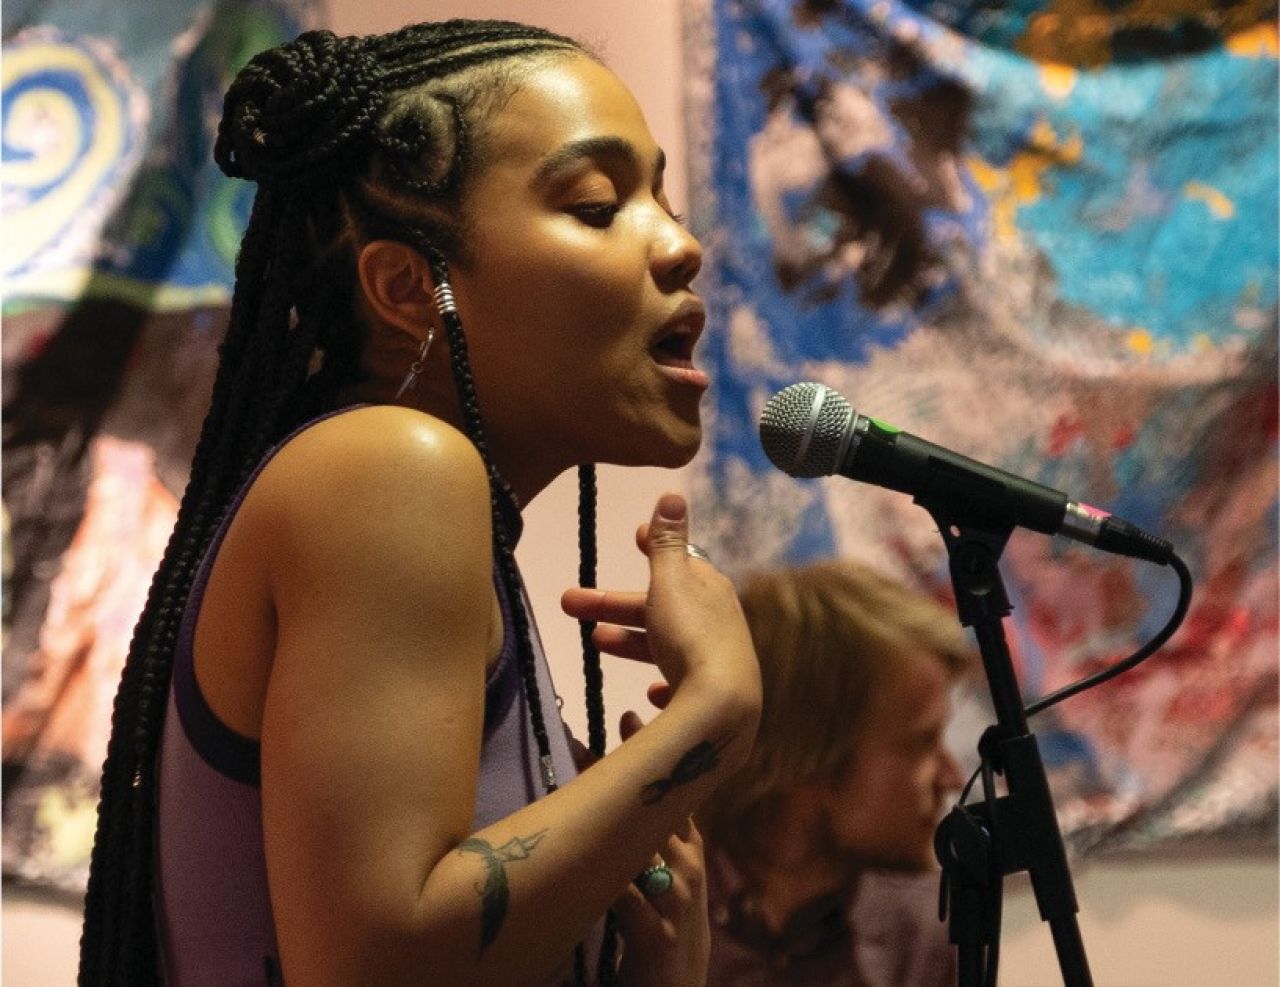 A young Black woman singing on stage.